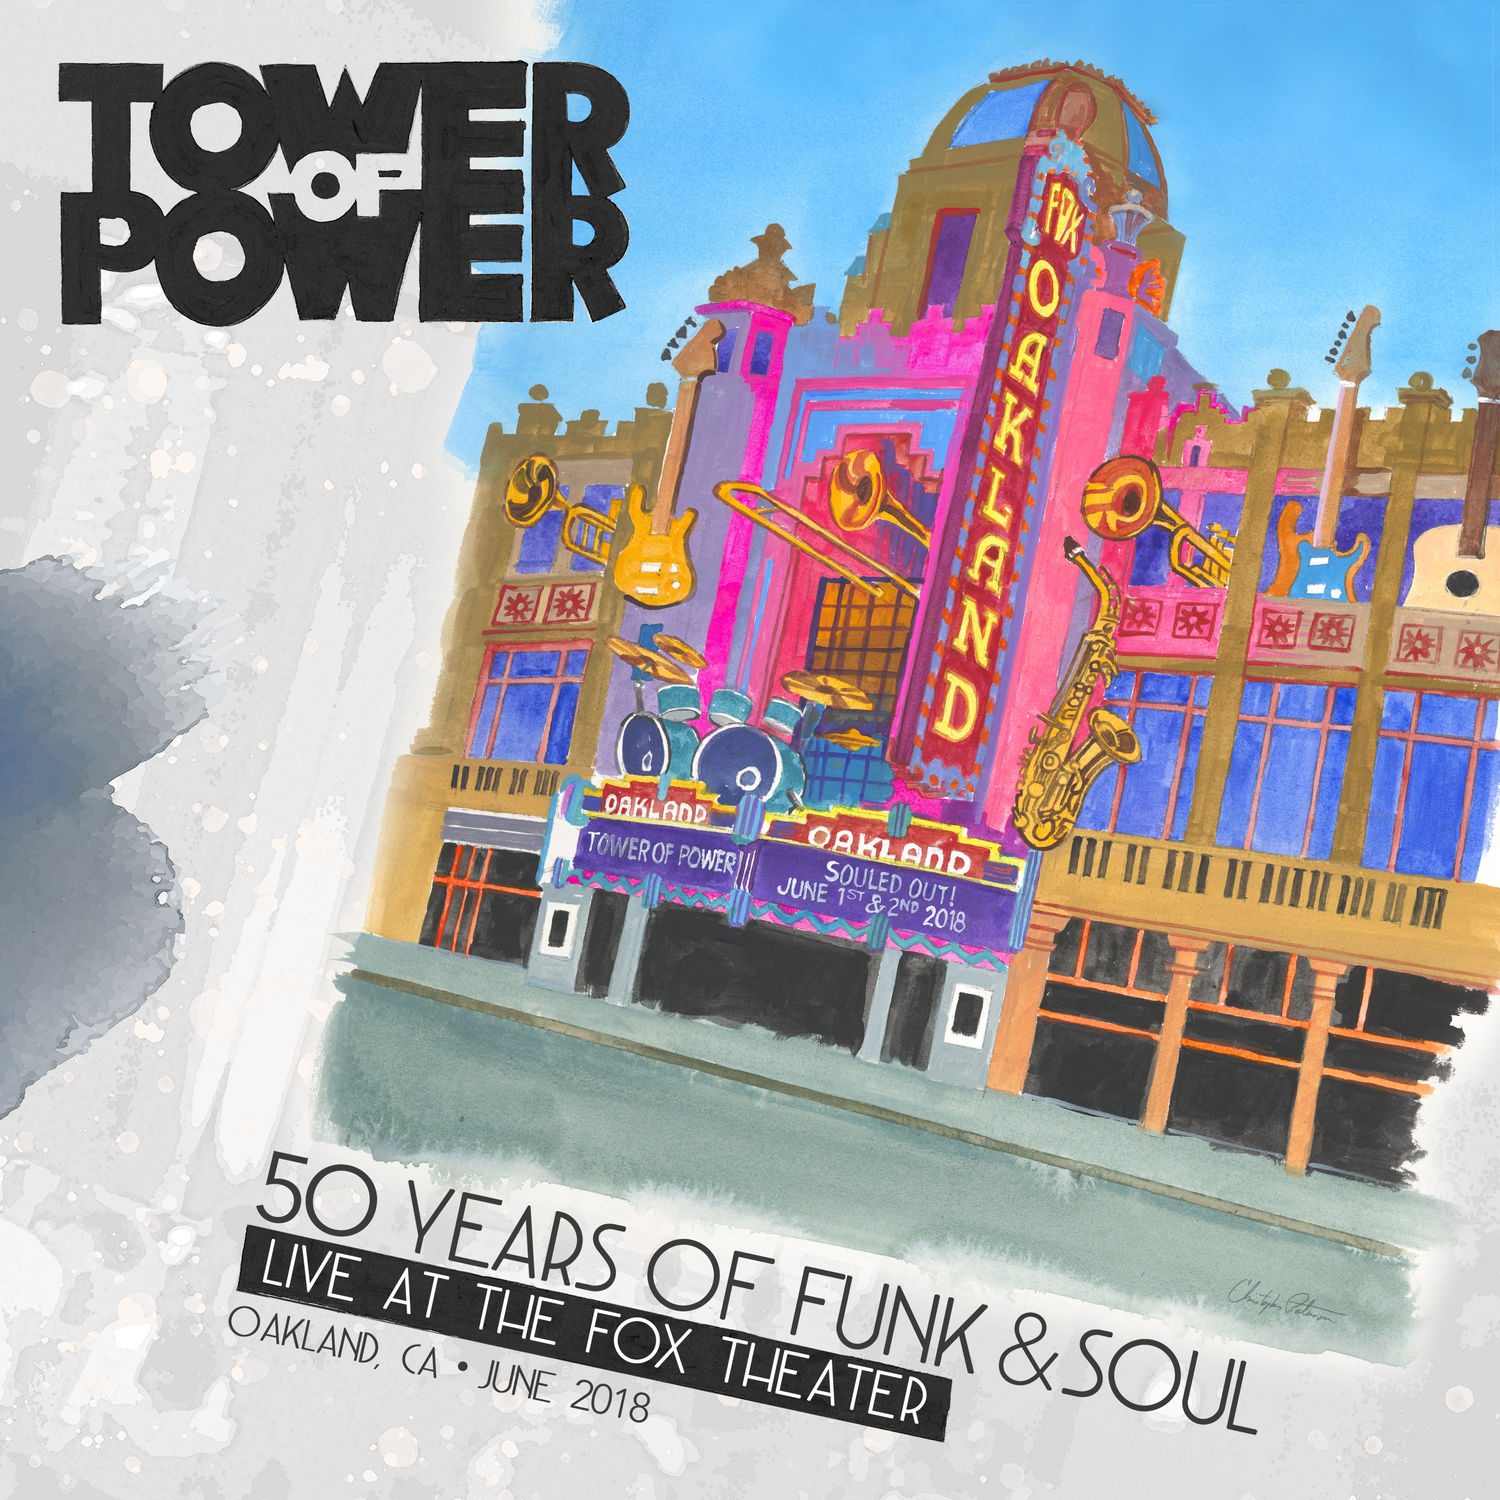 Tower Of Power - 50 Years of Funk & Soul Live at the Fox Theater-Oakland, CA - June 2018 (2021) [FLAC 24bit/96kHz]